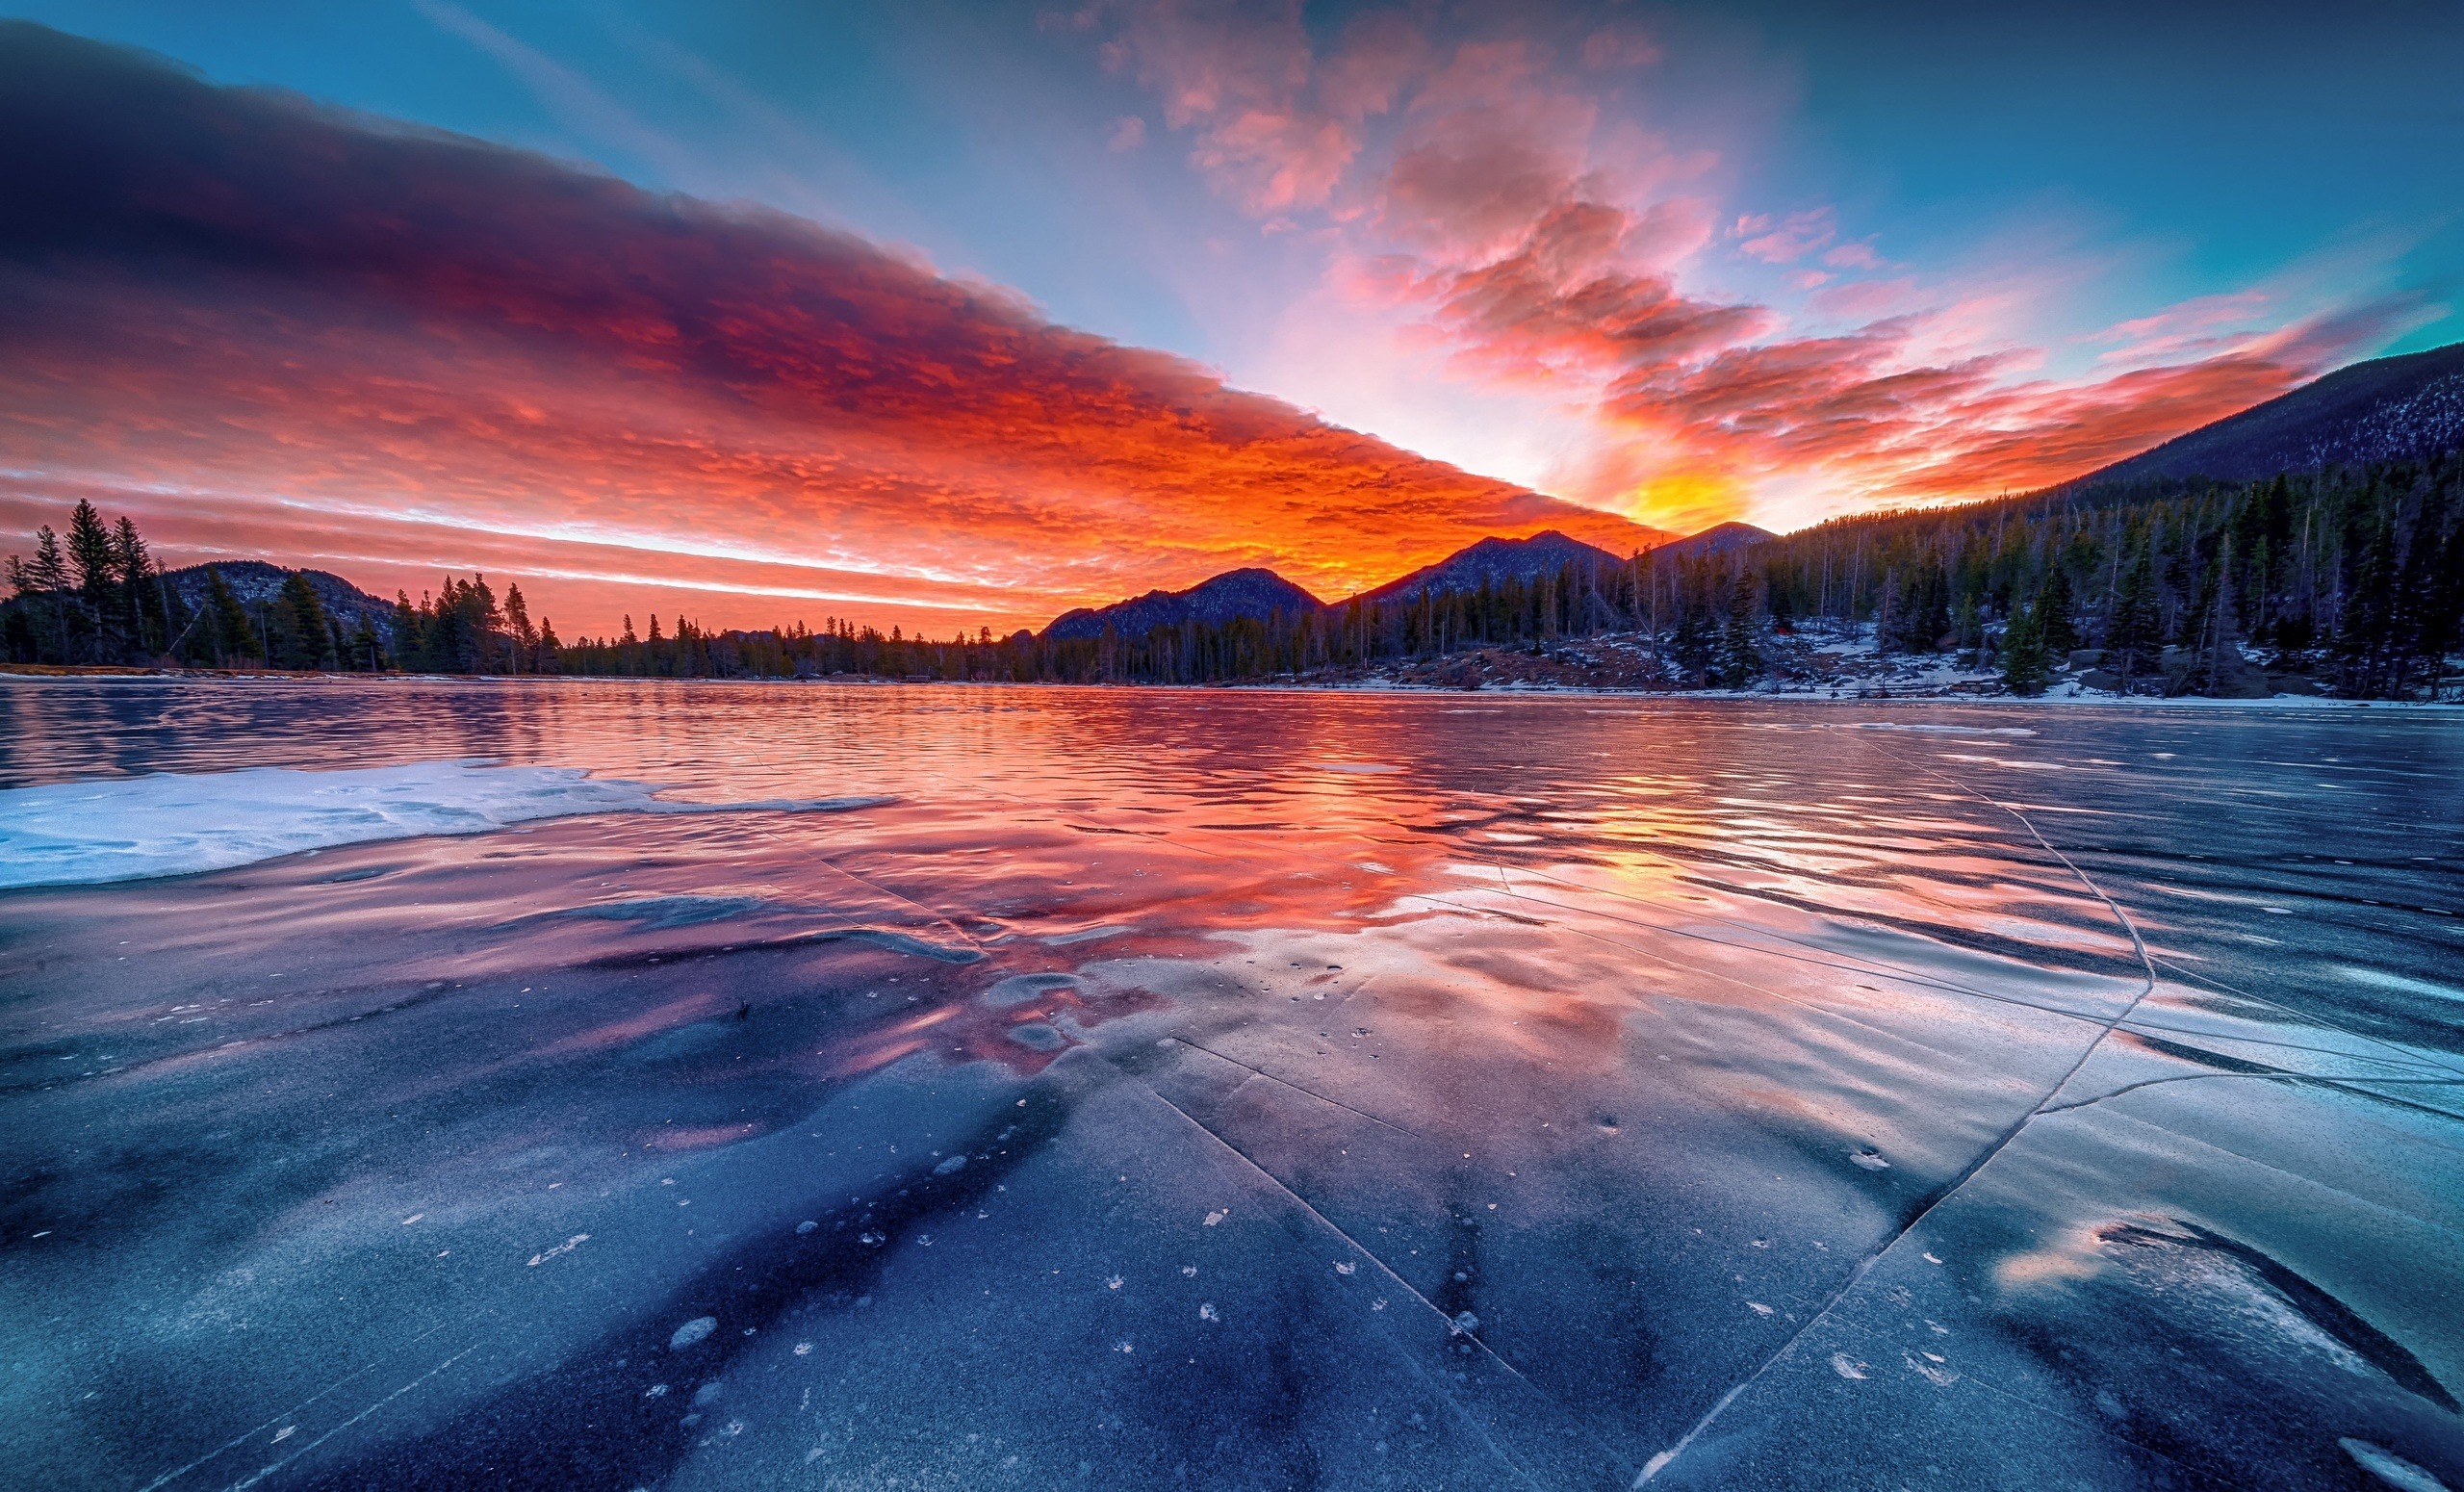 Download 2560x1600 wallpapers frozen lake, sunset, winter, skyline, nature, dual wide, widescreen 16:10, widescreen, 2560x1600 hd image, background, 2300